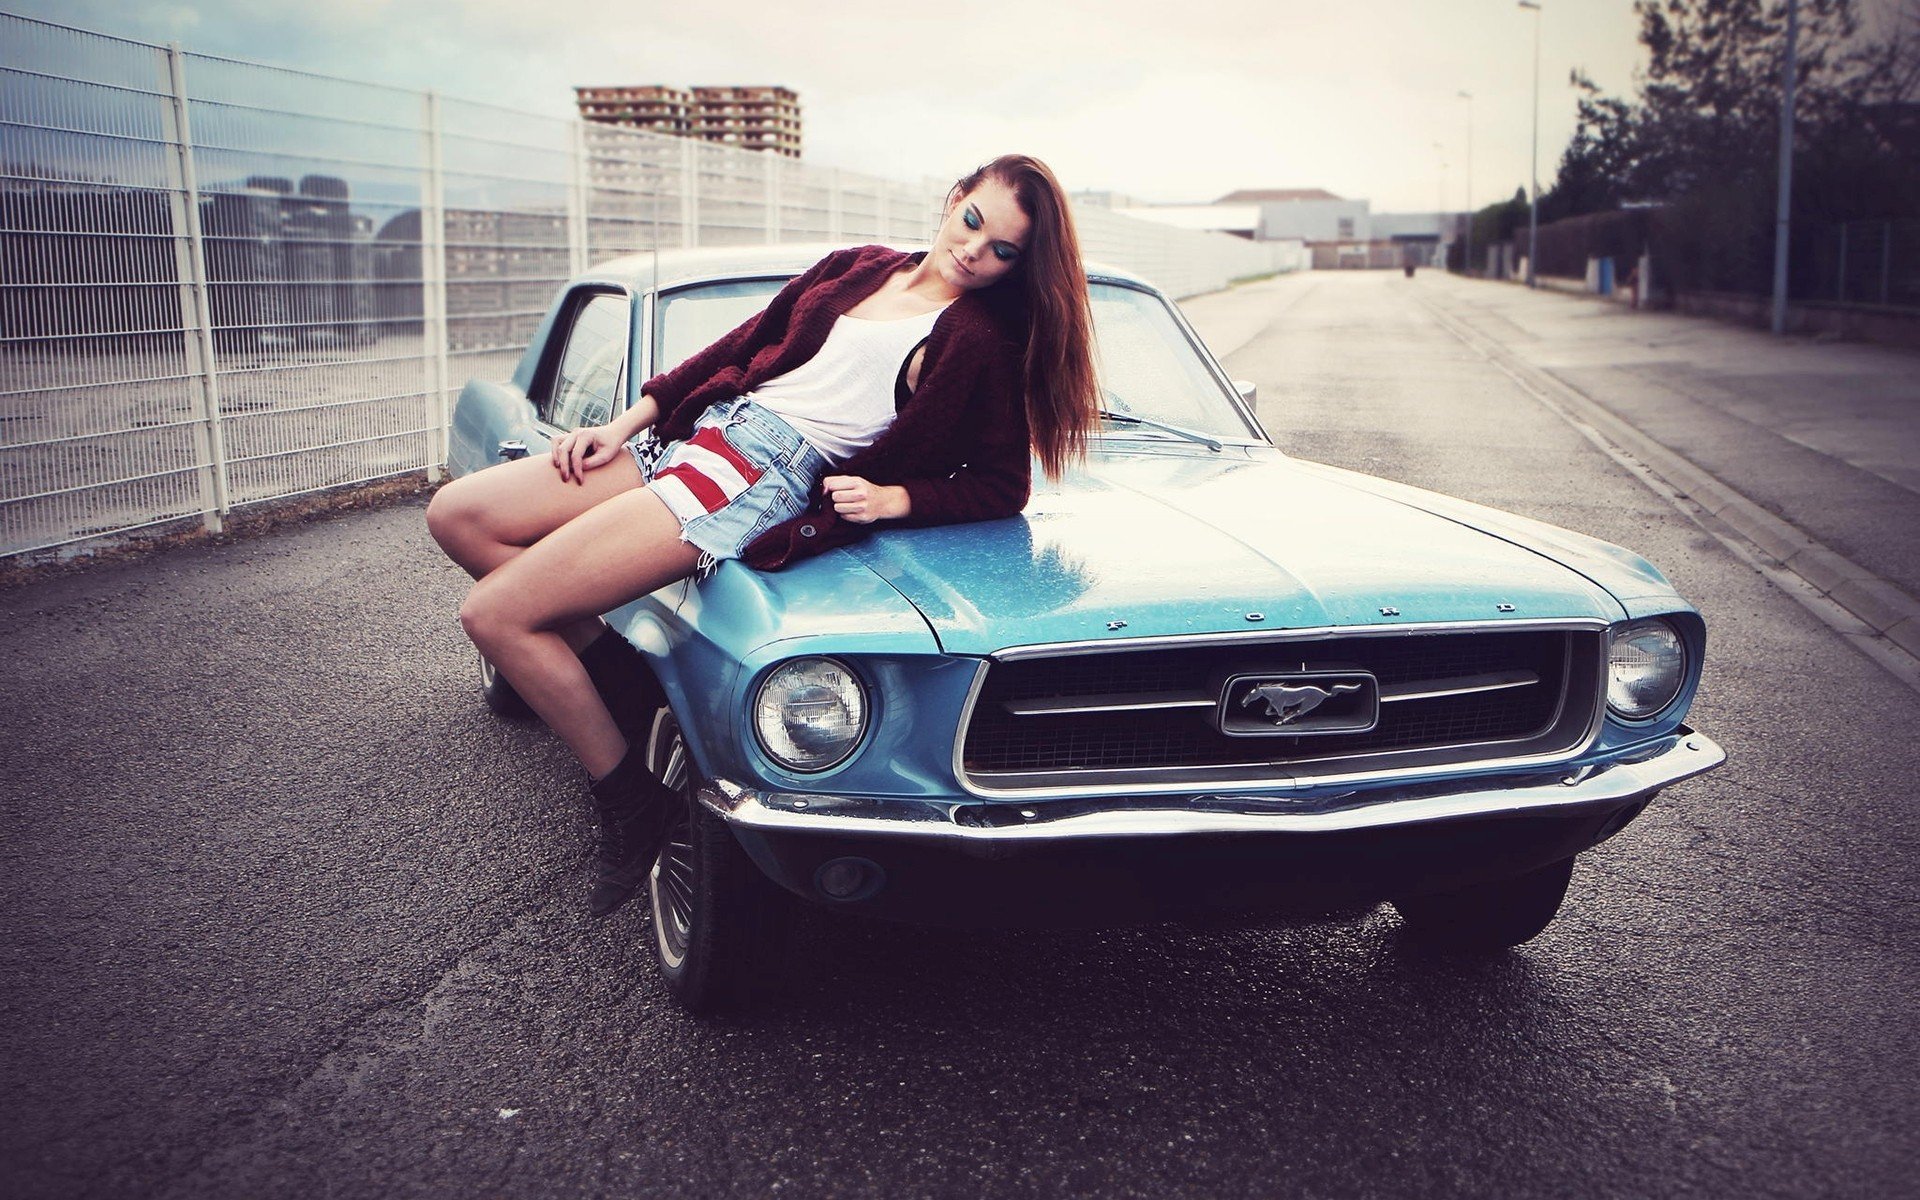 Women Ford Car Ford Mustang Jean Shorts Shorts Sweater Open